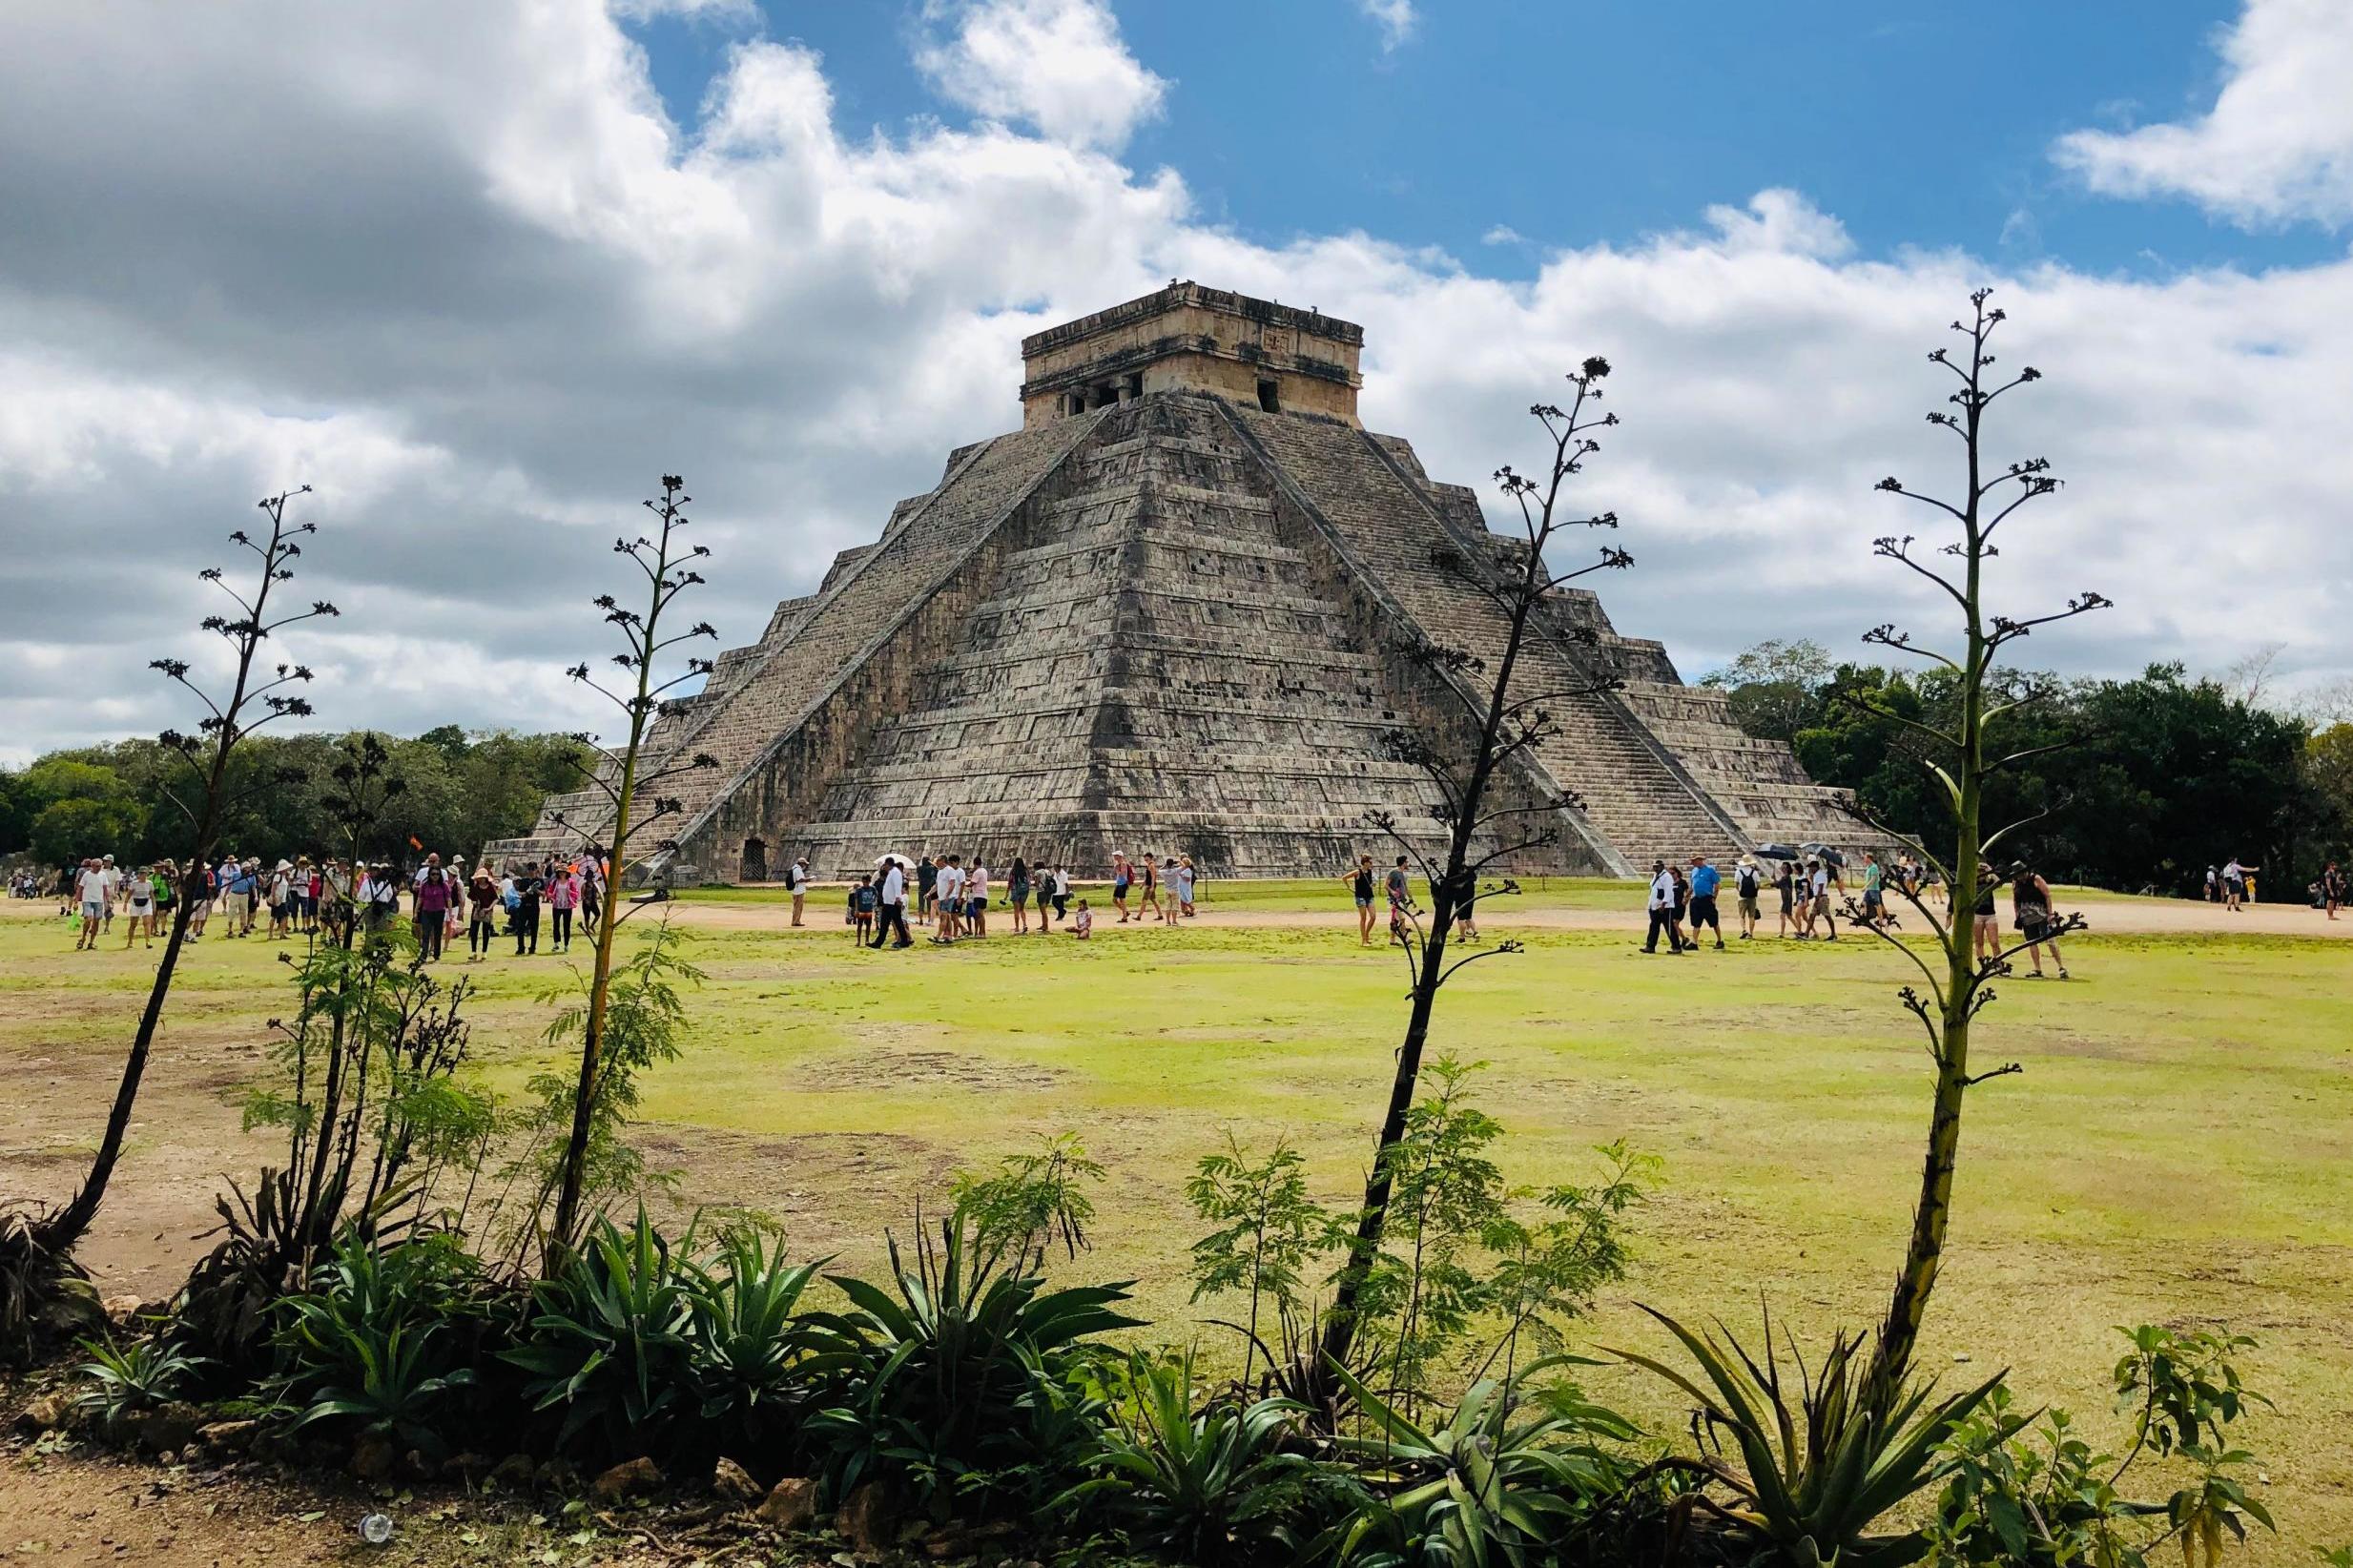 Kukulcan Pyramid at the Mayan archaeological site of Chichen Itza in Yucatan state, Mexico